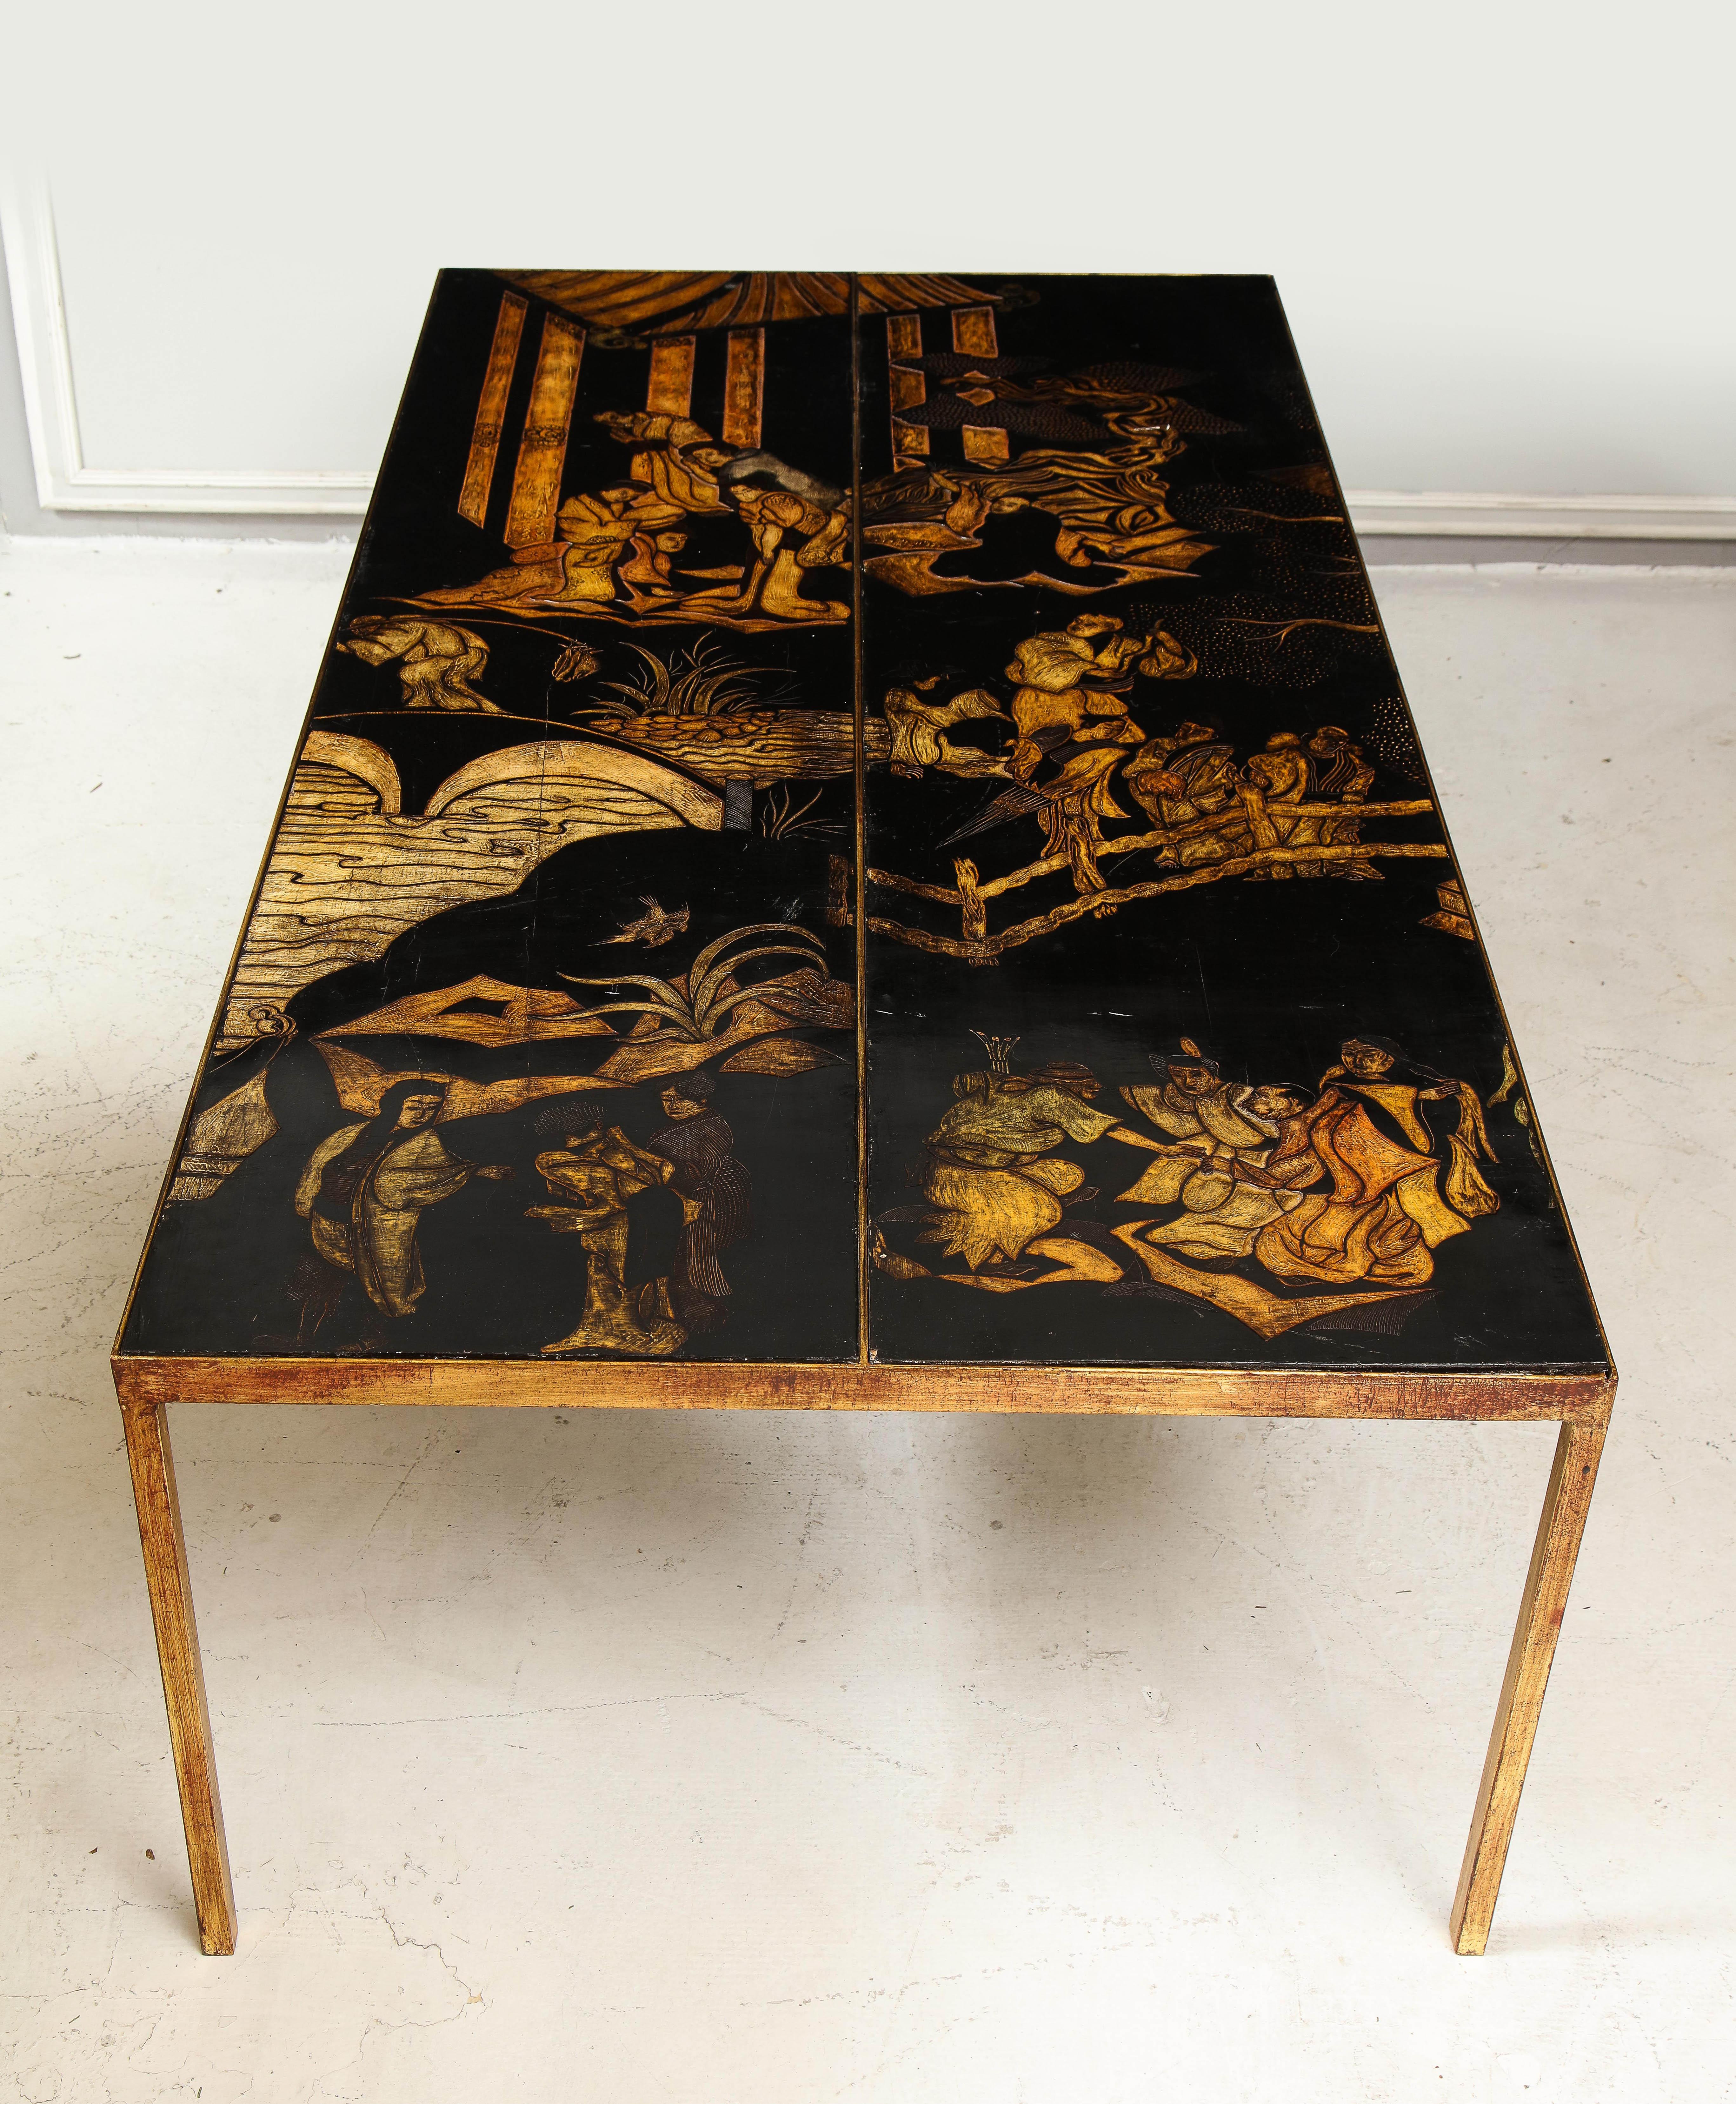 Exceptional hand-lacquered chinoiserie coffee table on gilt-iron base - table top depicting Asian characters and scenery - all hand-carved. Price for one table. Additional table available.

 